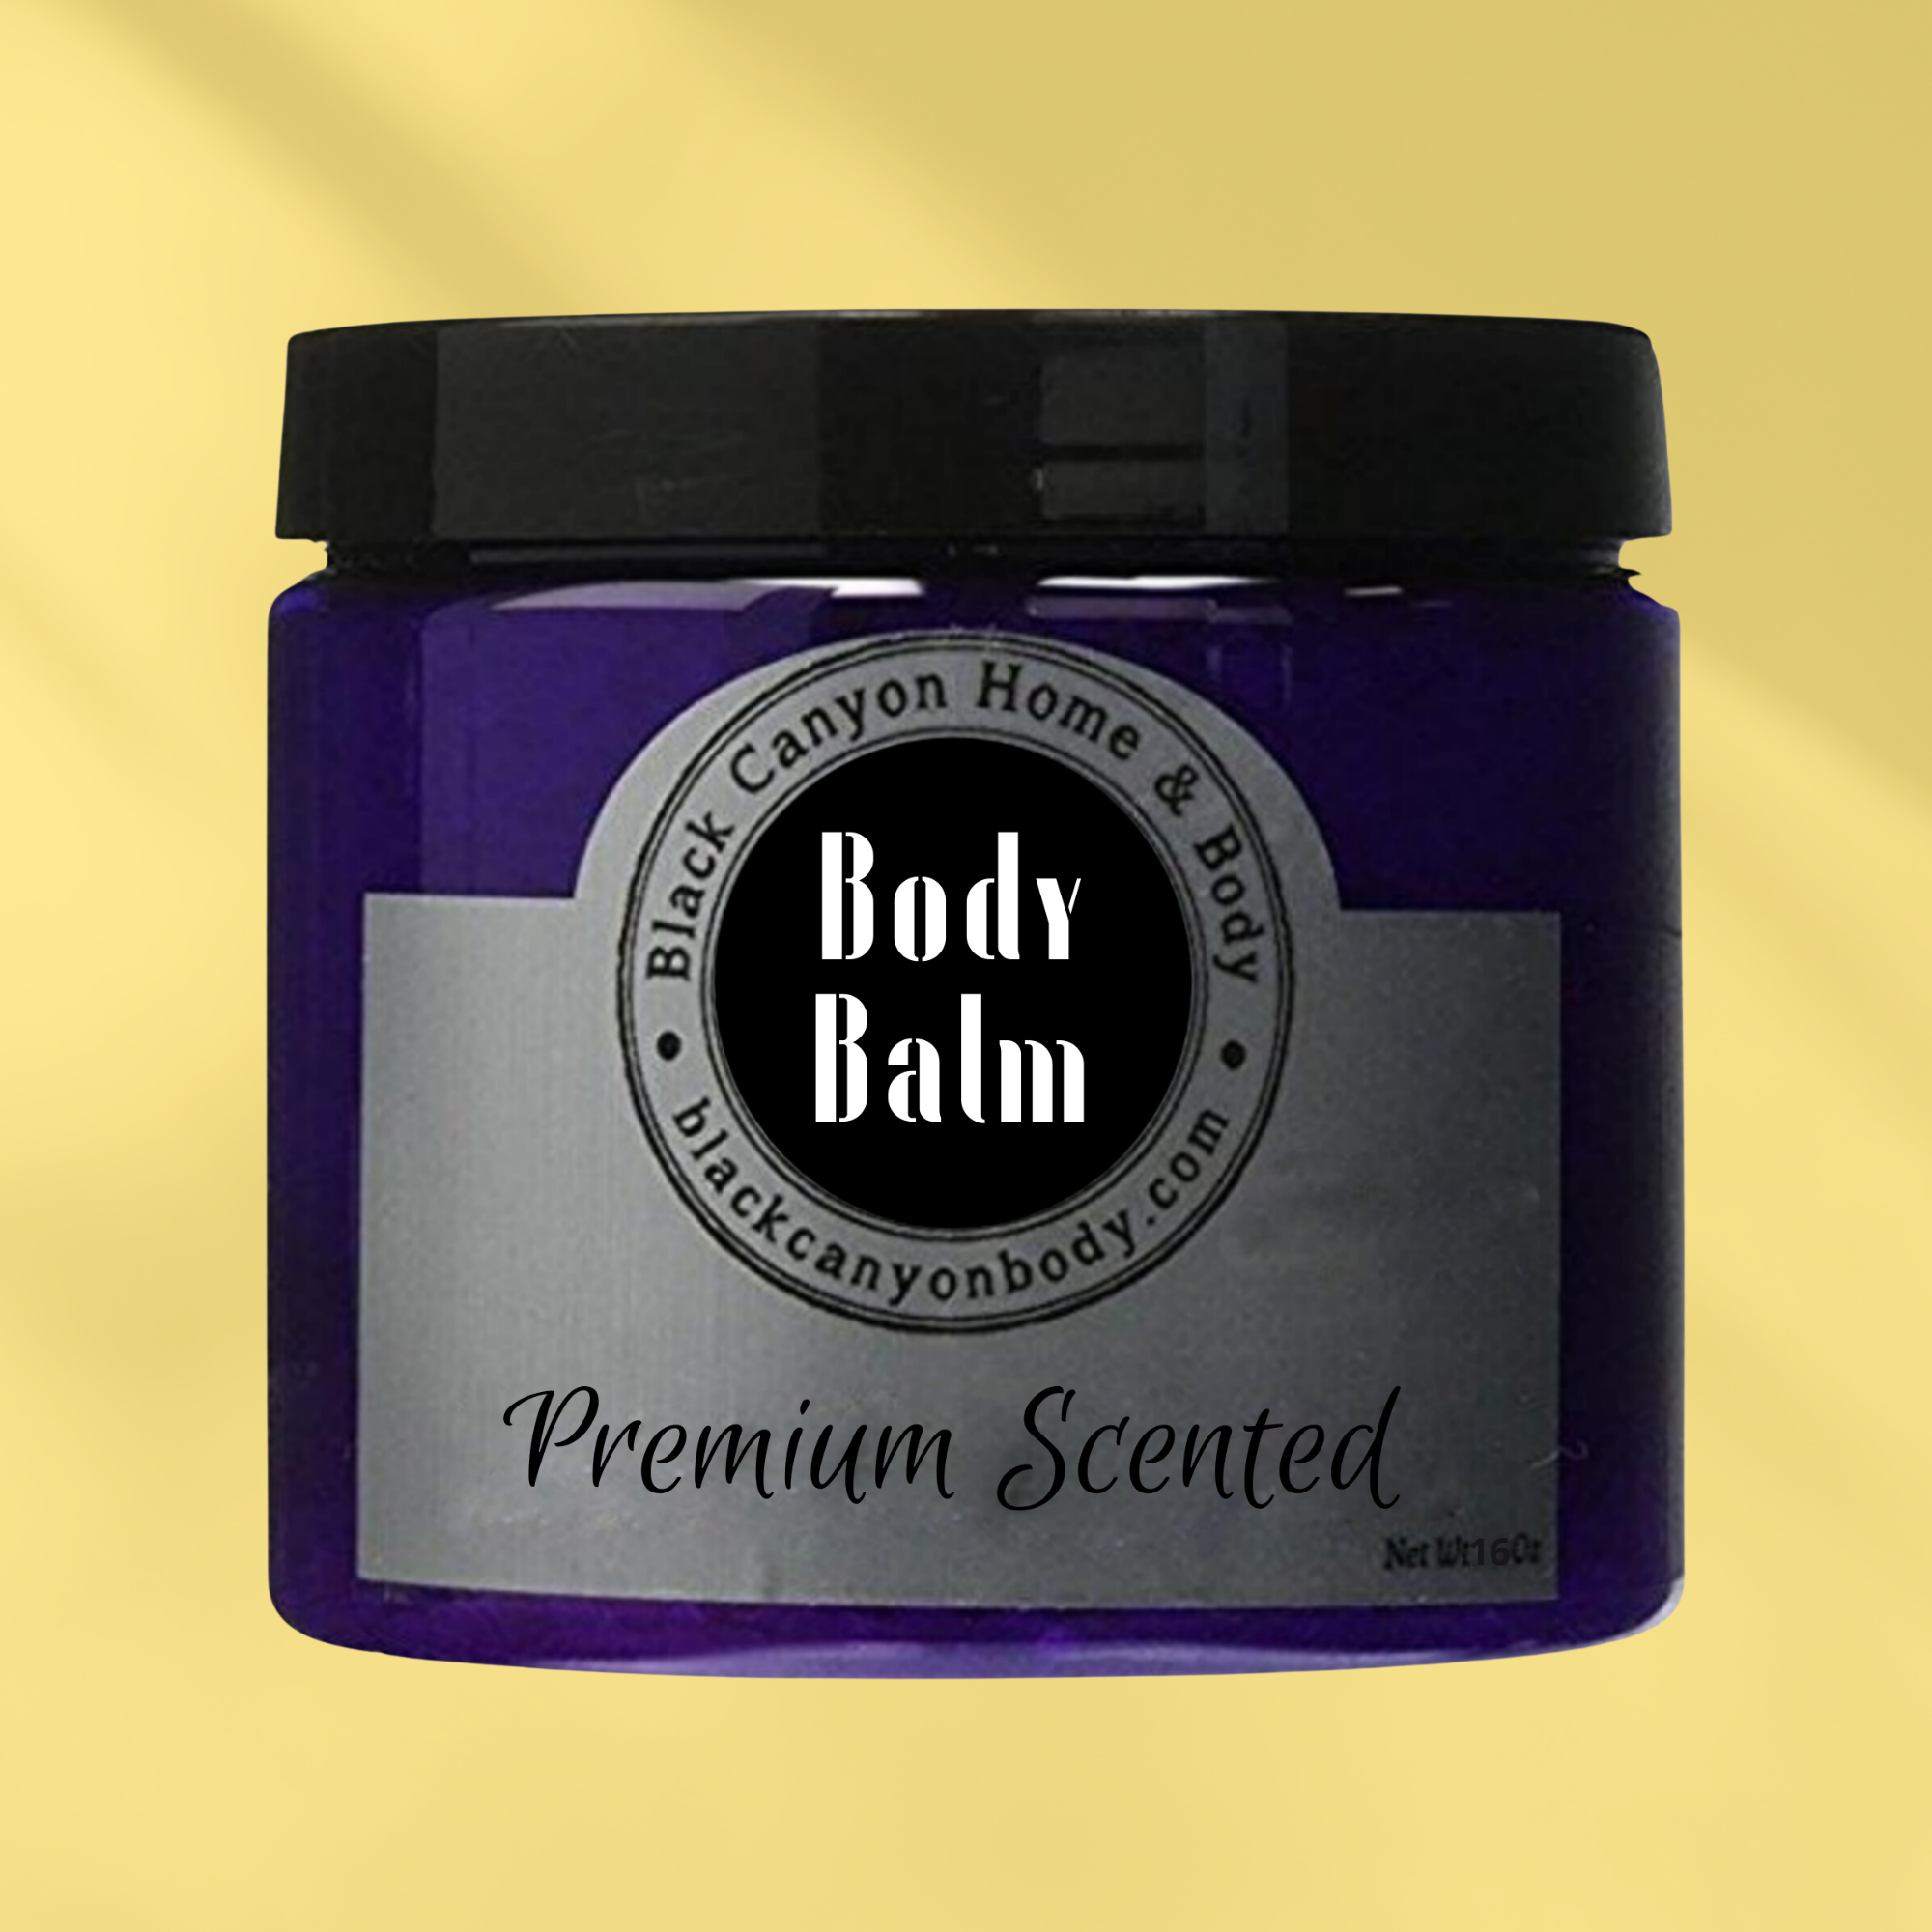 Black Canyon Simply Sinful Scented Natural Body Balm with Shea